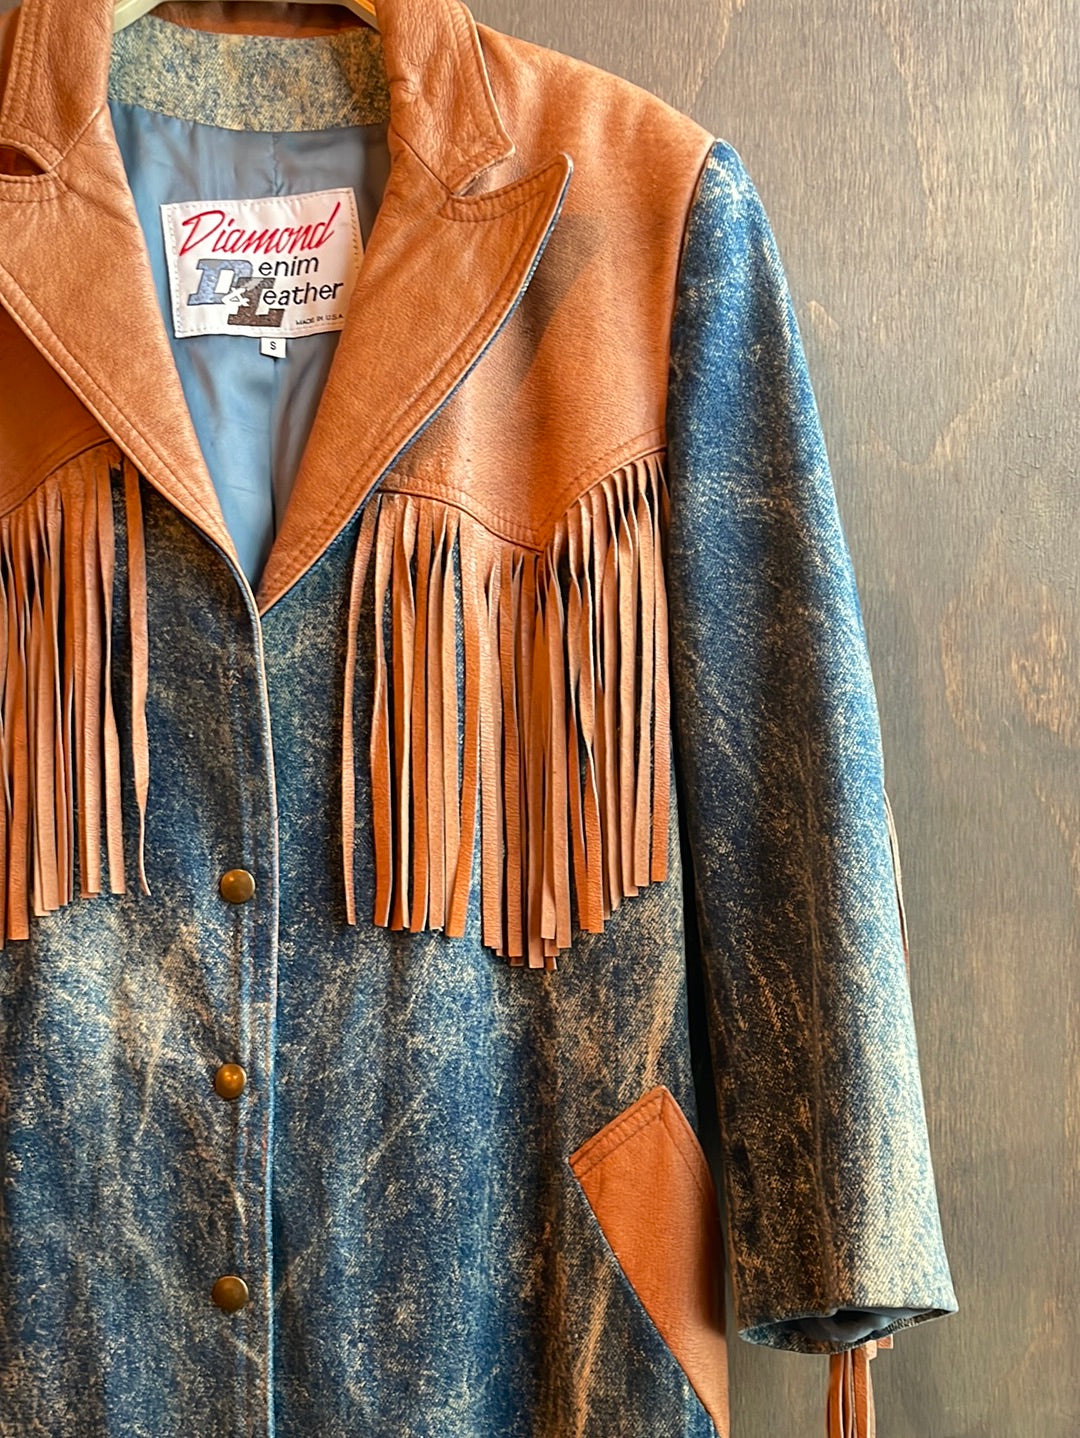 Vintage Diamond Denim and Leather Duster with Fringe